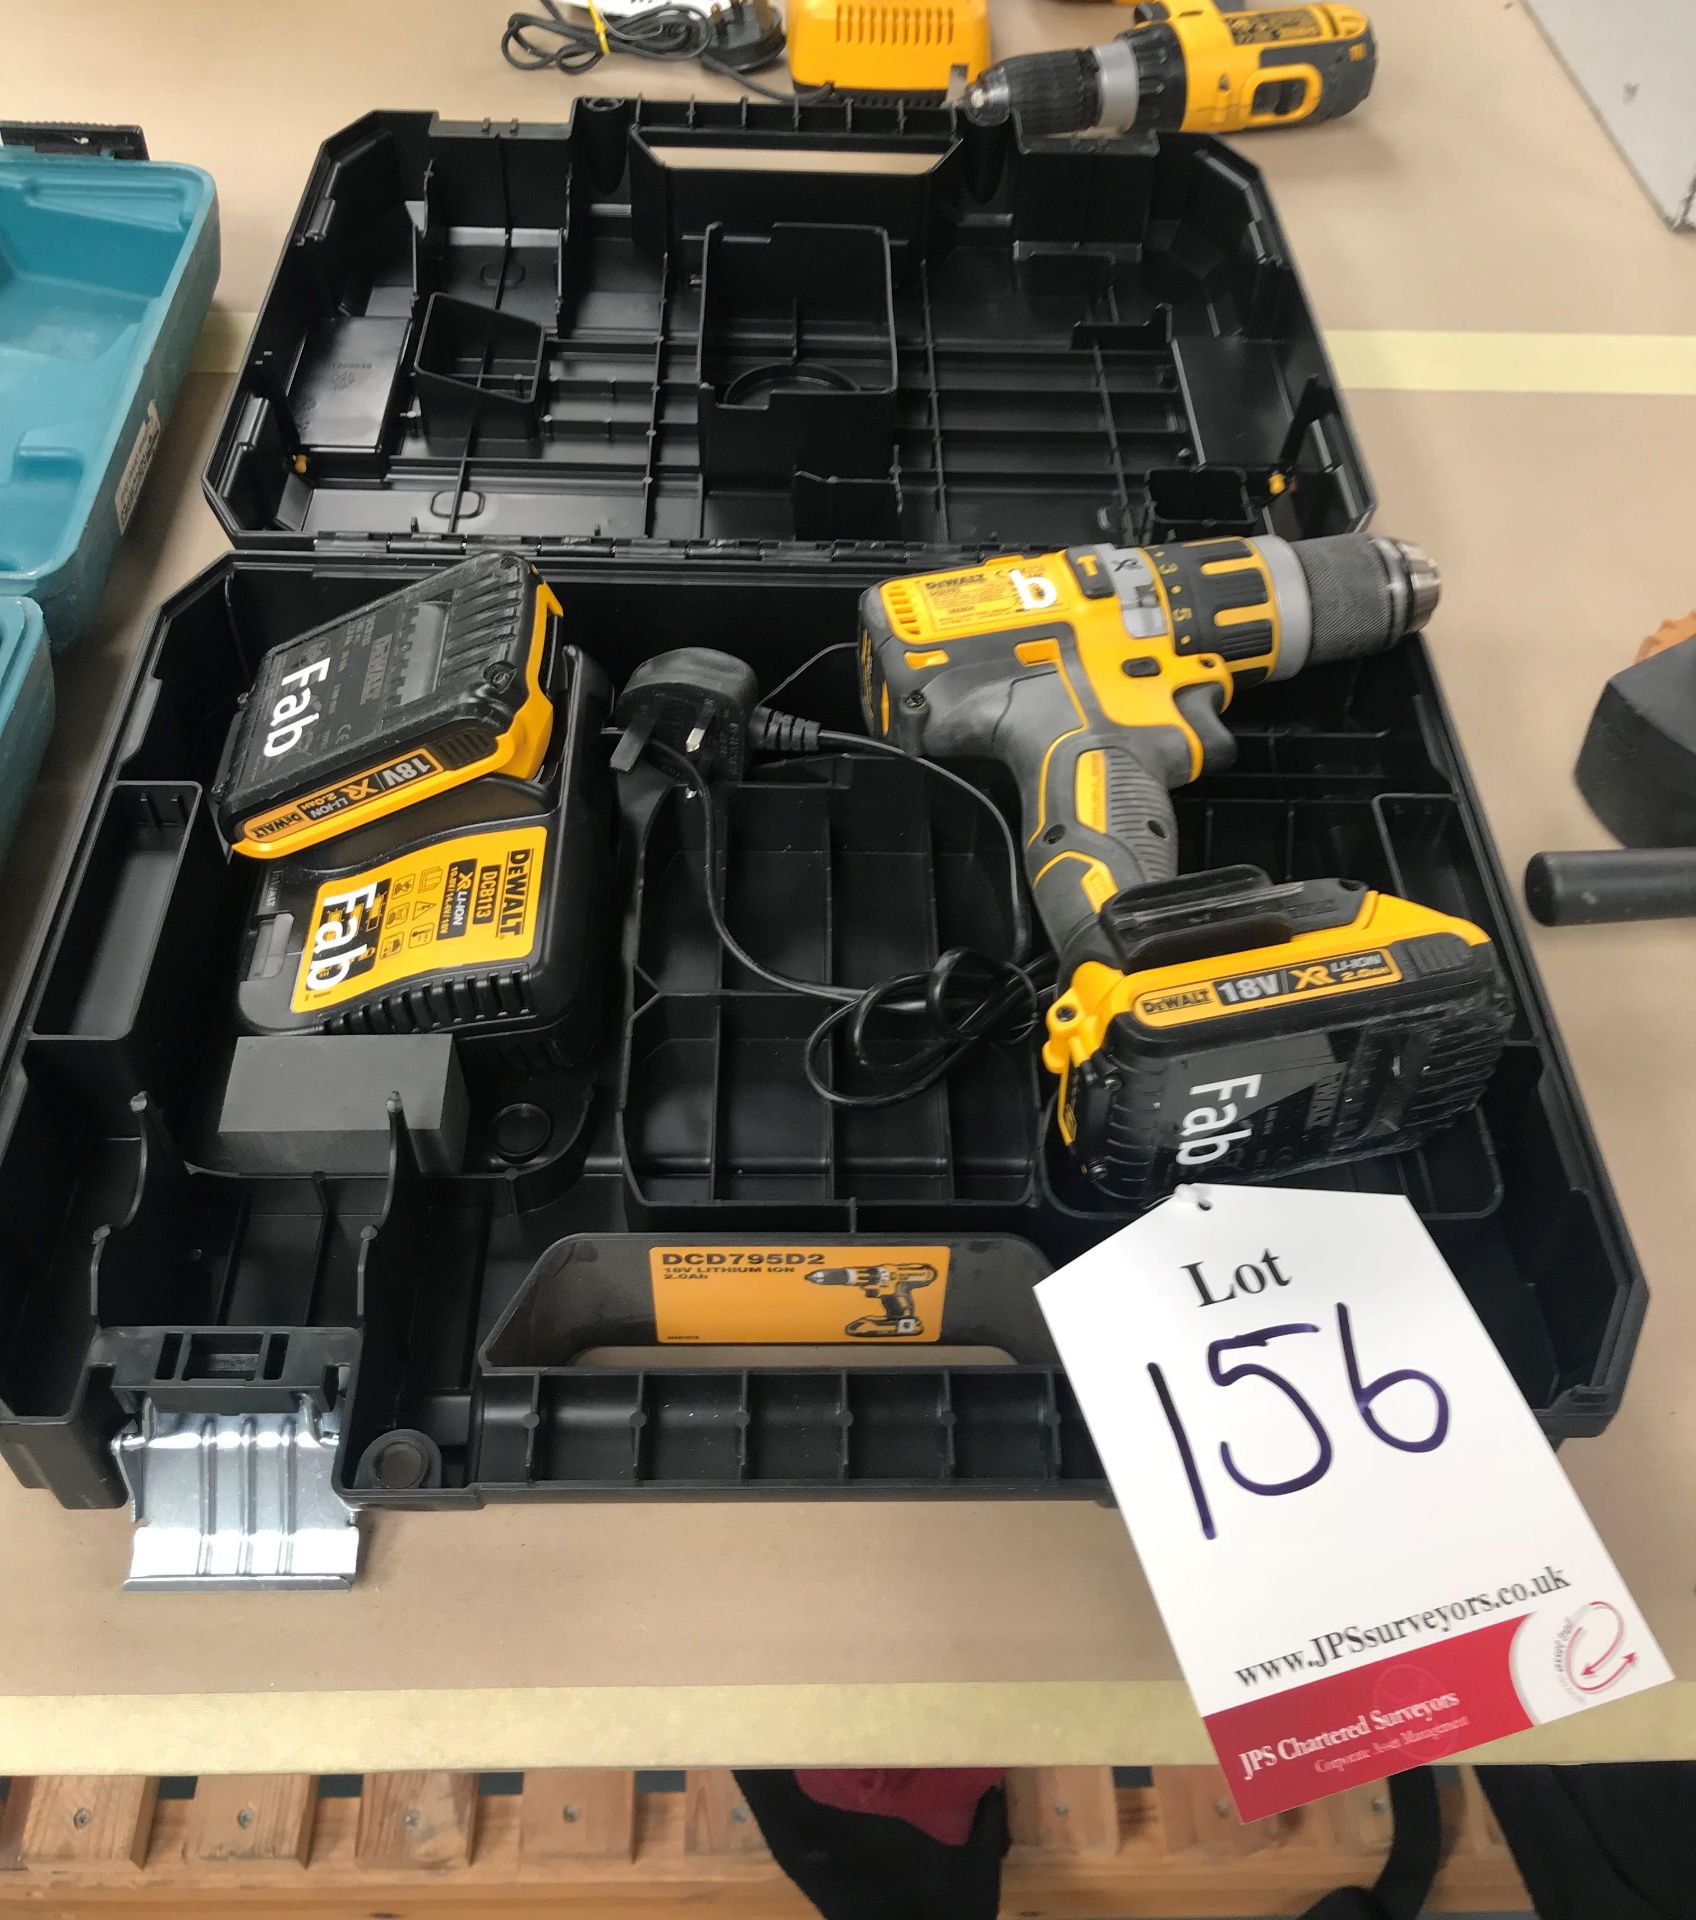 Dewalt DCD795 Brushless Combi Drill w/ Case, Charger & Spare Battery